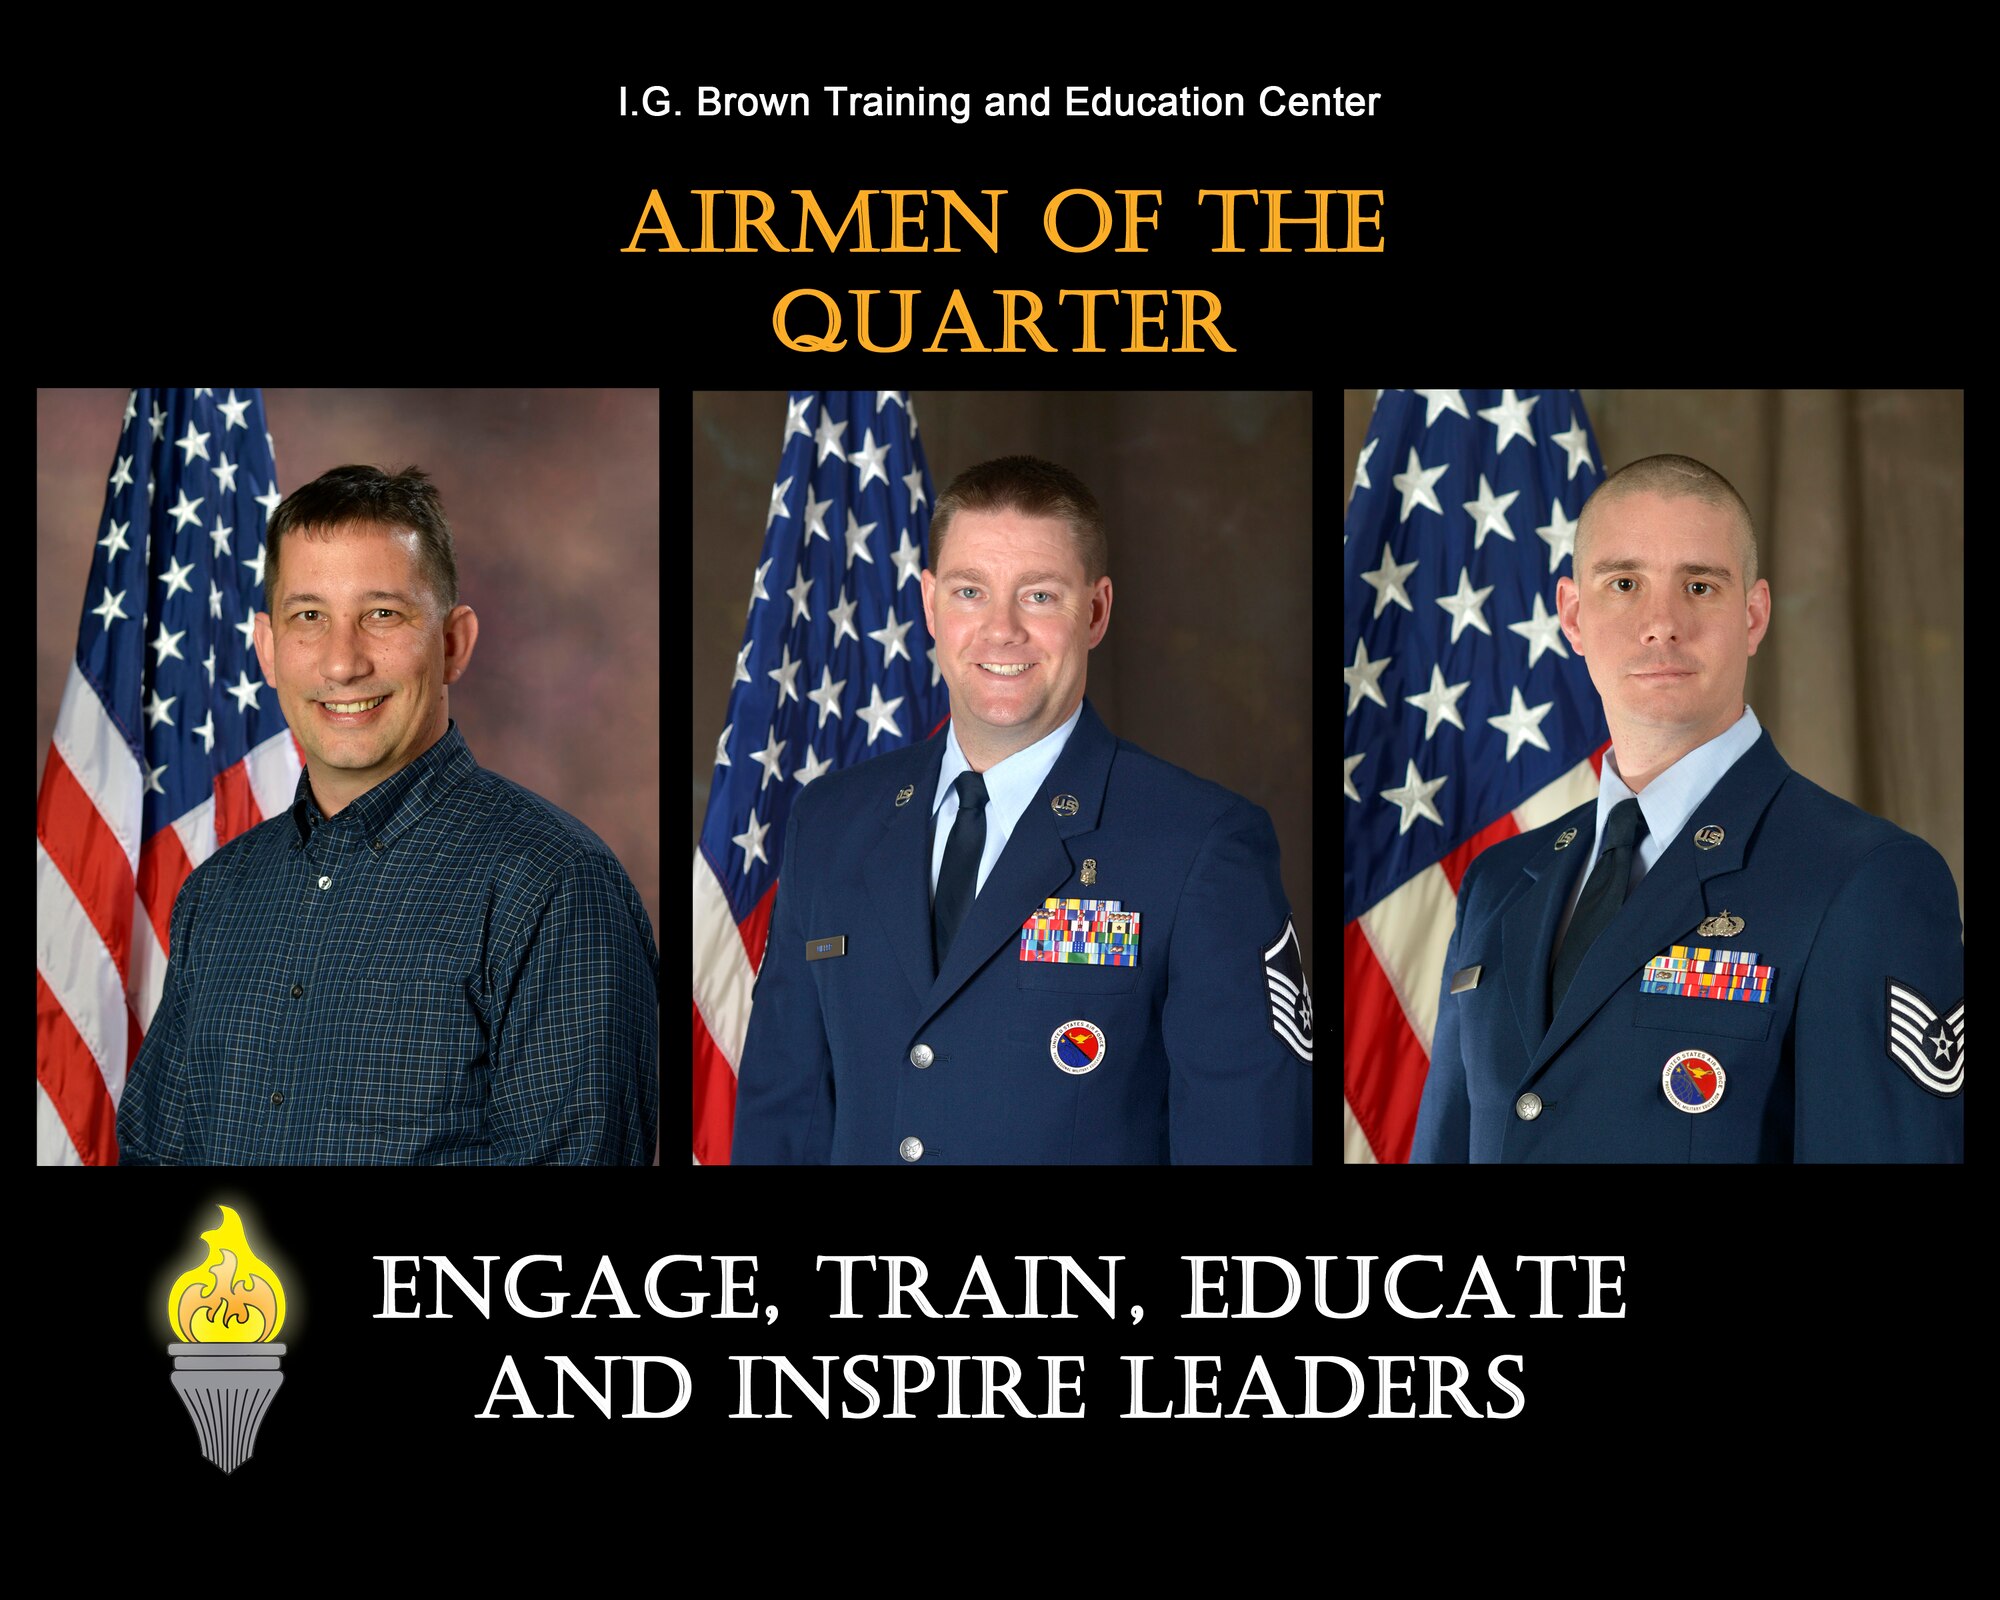 David Barlow, graphics manager for the Media and Engagement Division, TEC TV (civilian of the quarter), Master Sgt. Jason Miller, Distance Learning superintendent, senior EPME instructor for the Chief Master Sergeant Paul H. Lankford Enlisted Professional Military Education Center (senior NCO of the quarter), and Tech. Sgt. Michael Wells, EPME instructor for the Lankford Center (NCO of the quarter), are recognized for their outstanding service from April to June 2016, at the I.G. Brown Training and Education Center located on McGhee Tyson Air National Guard Base in Louisville, Tenn. (U.S. Air National Guard file photo illustration)